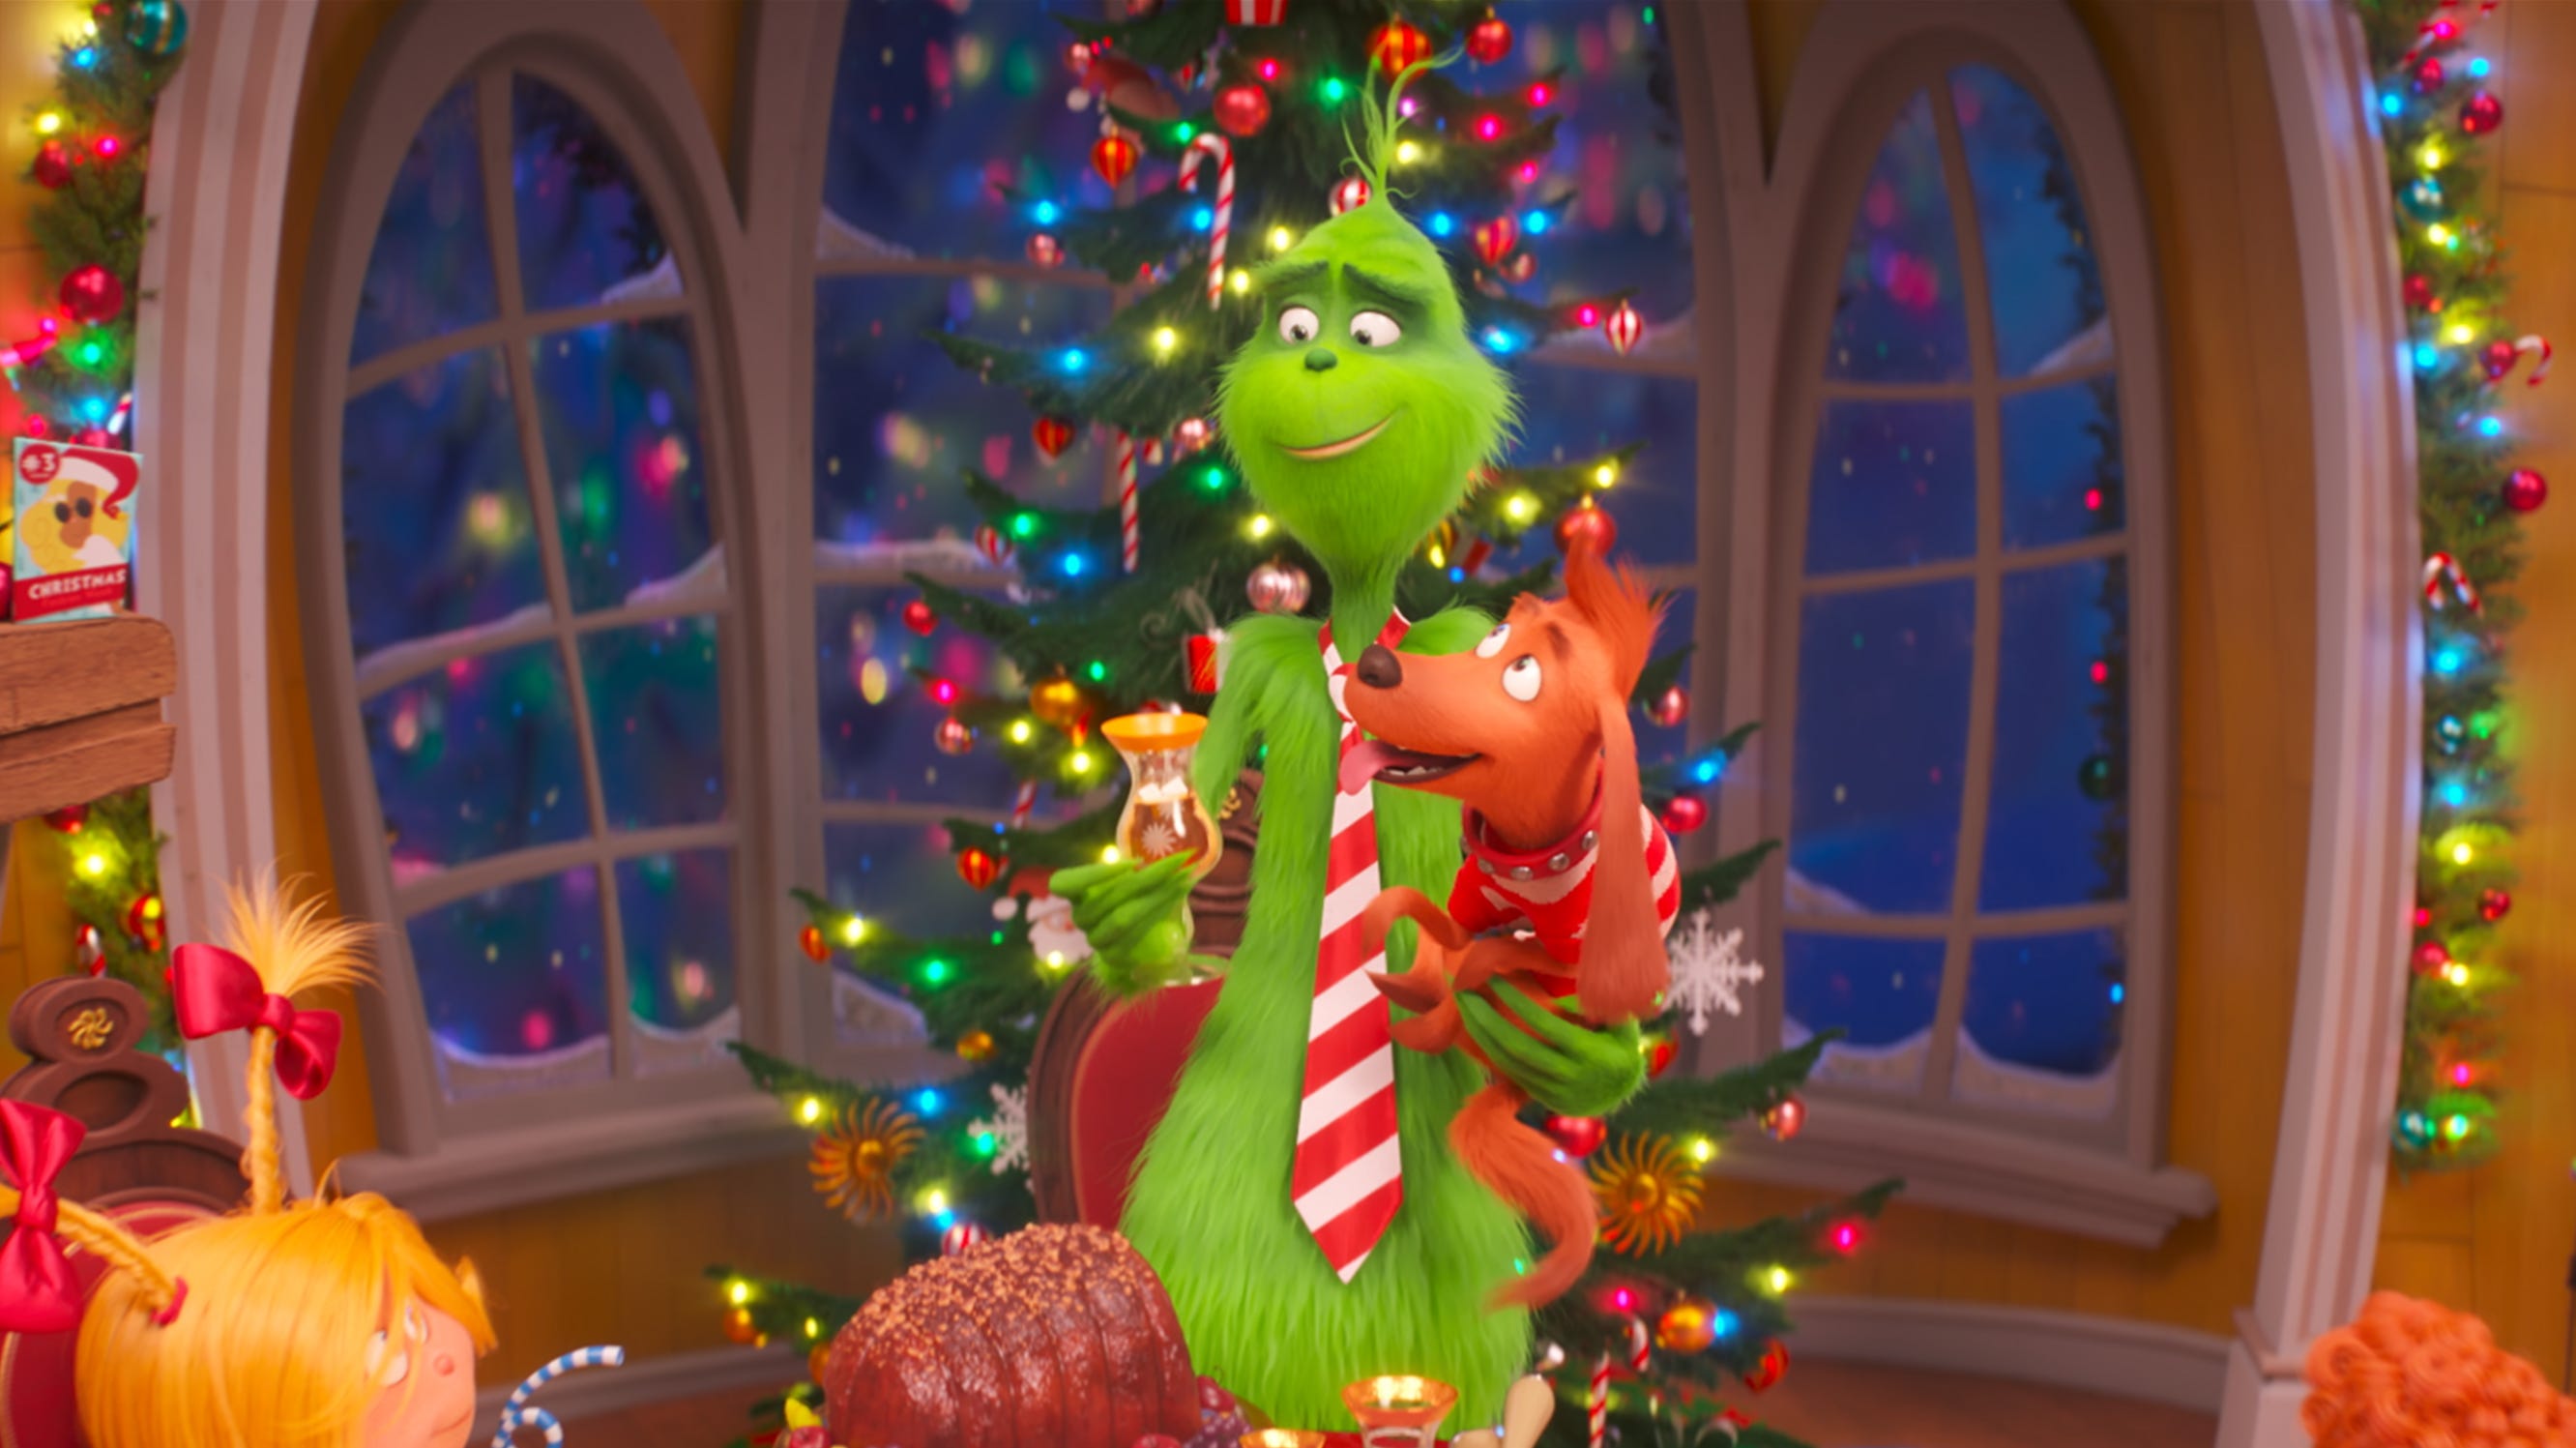 'The Grinch': Benedict Cumberbatch brings holiday cheer to box office